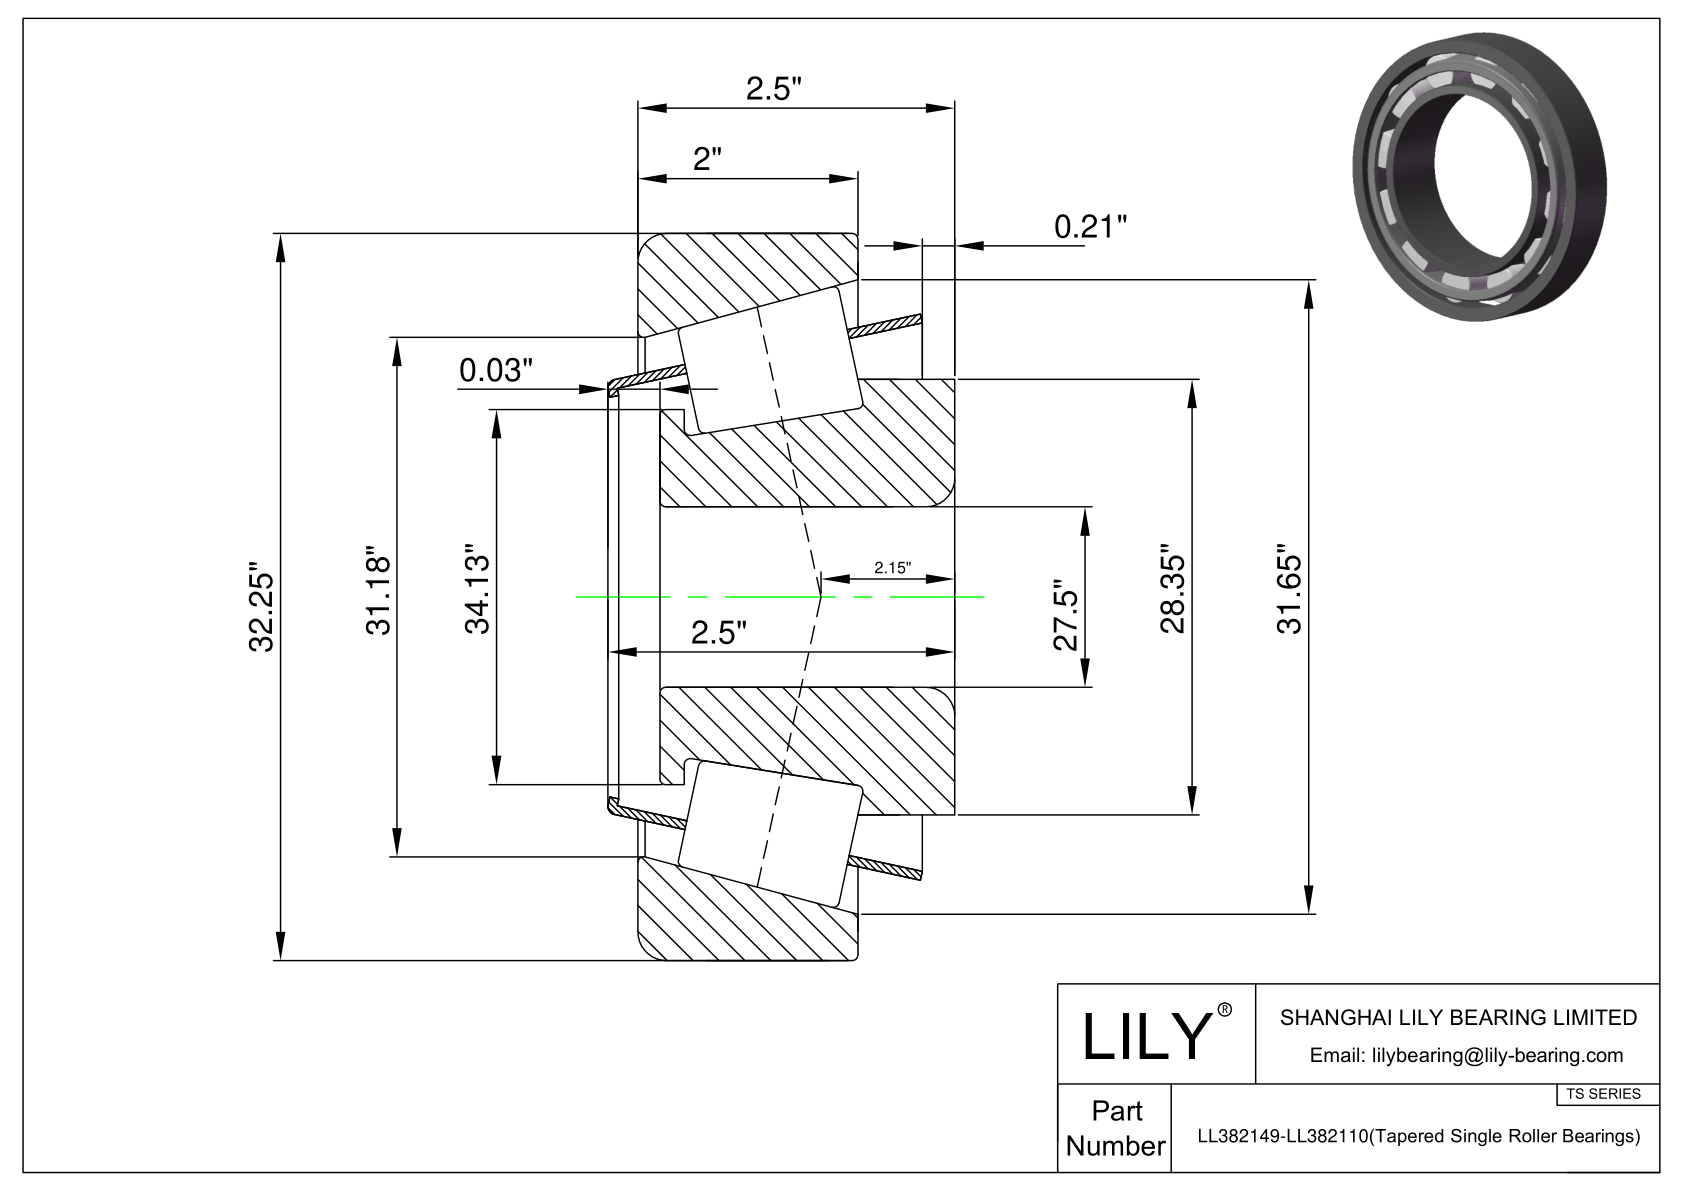 LL382149-LL382110 TS (Tapered Single Roller Bearings) (Imperial) cad drawing